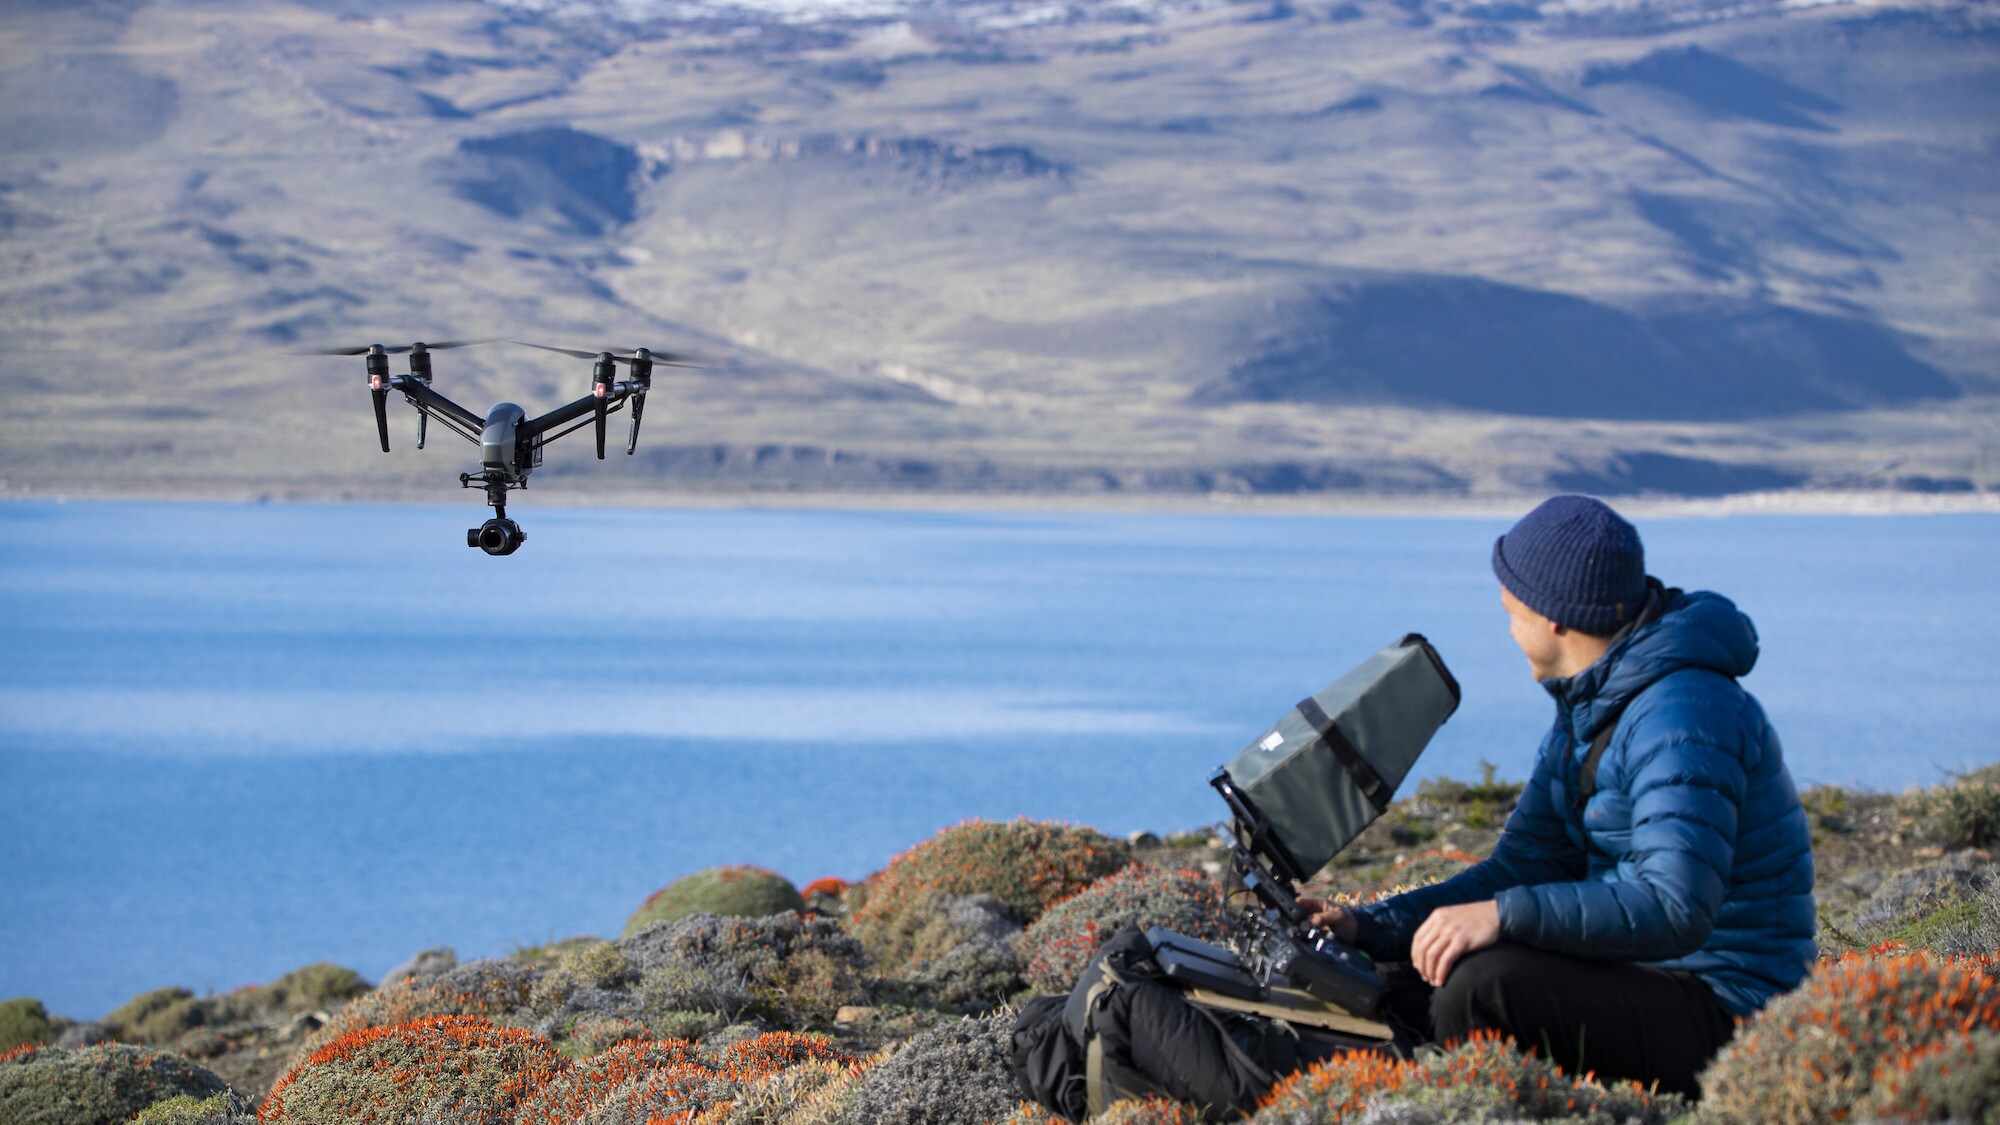 Bertie Gregory controlling the drone in Patagonia. (National Geographic for Disney+/Anna Dimitriadis)